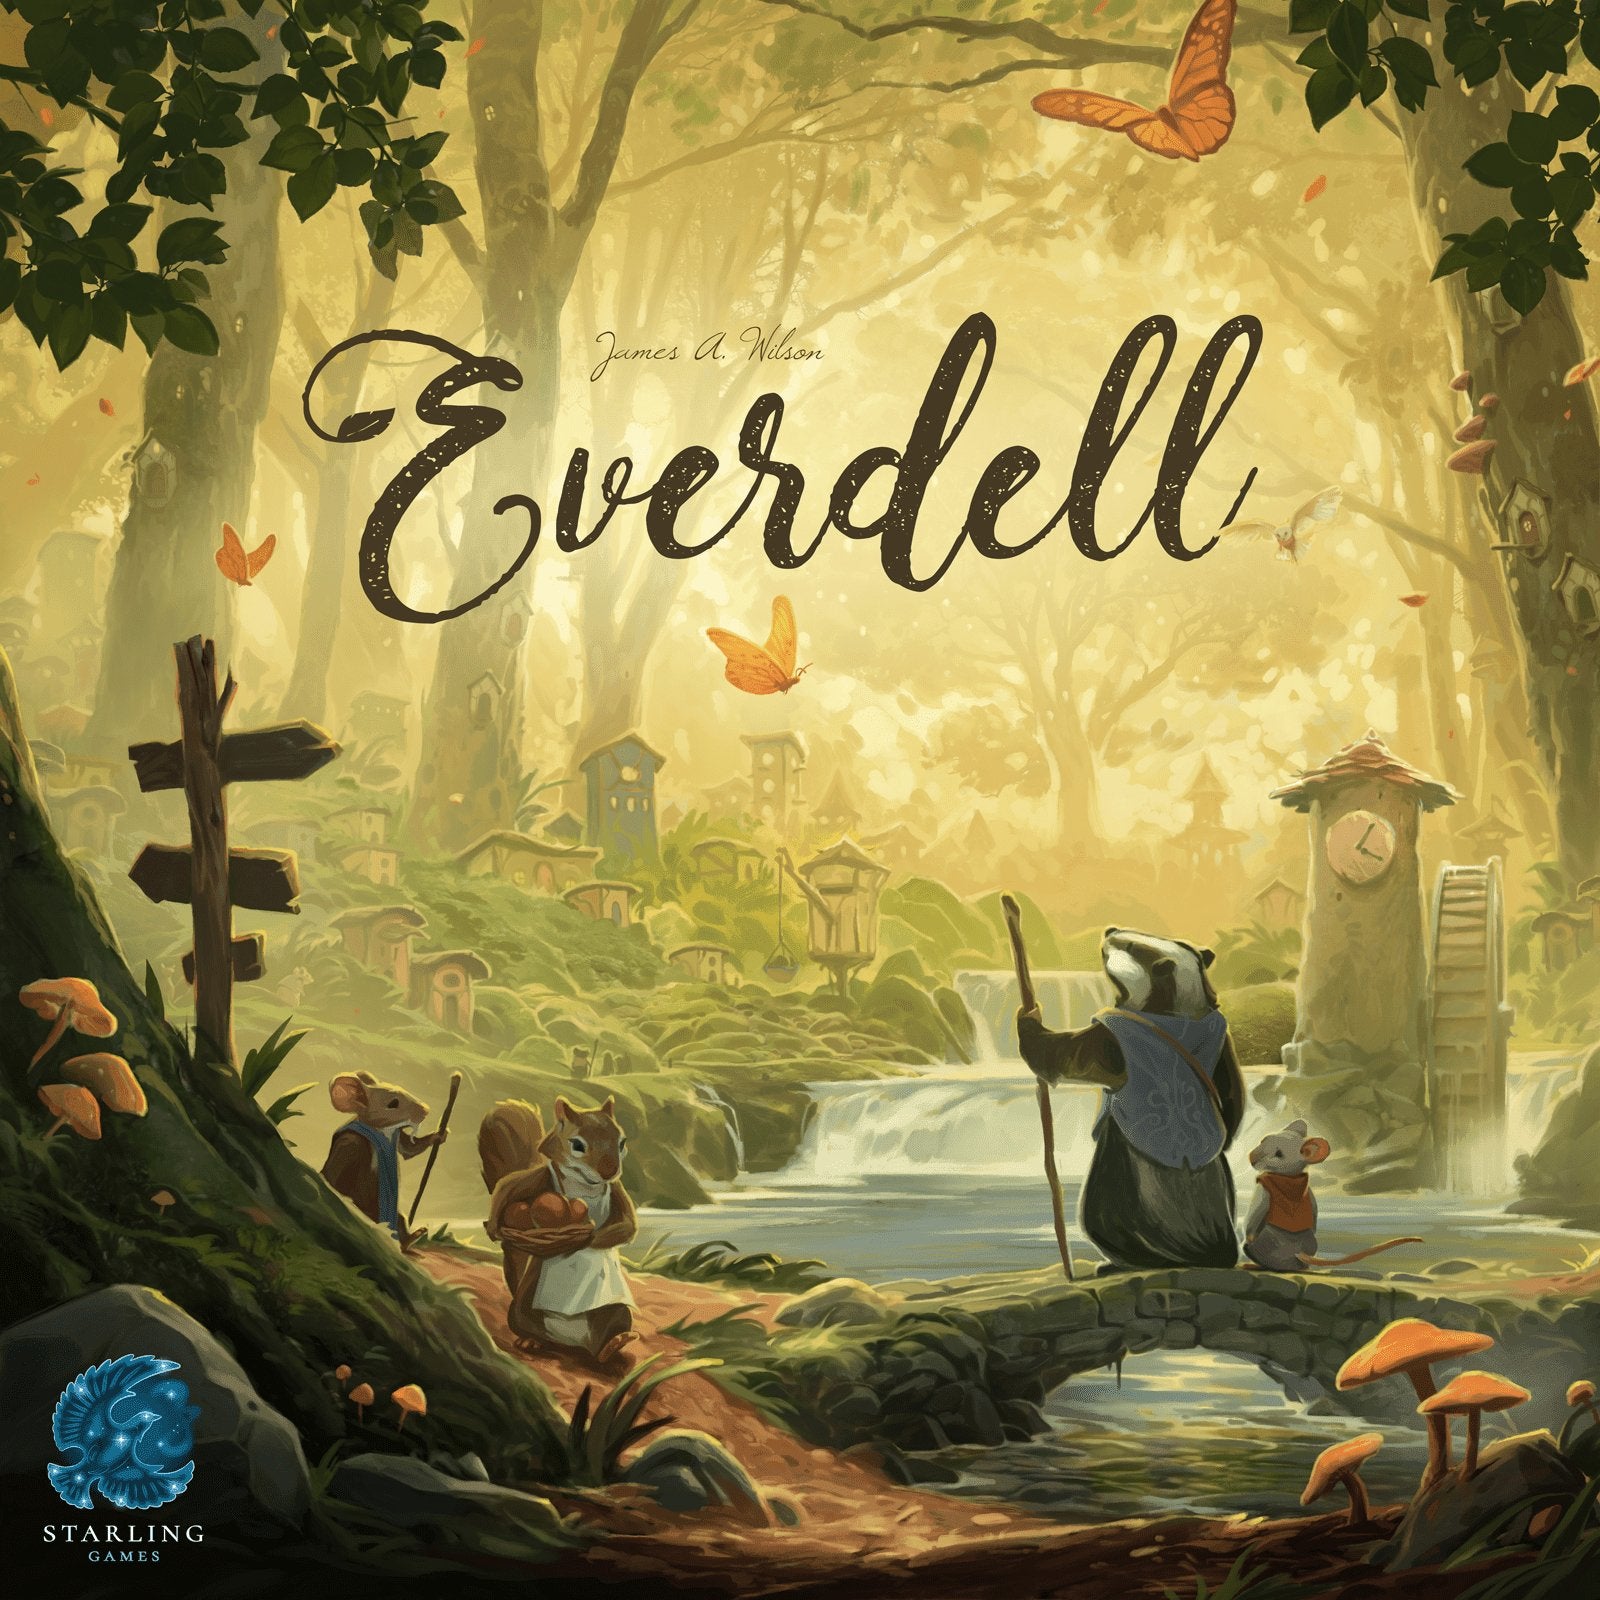 Everdell (3rd Edition) - Gaming Library